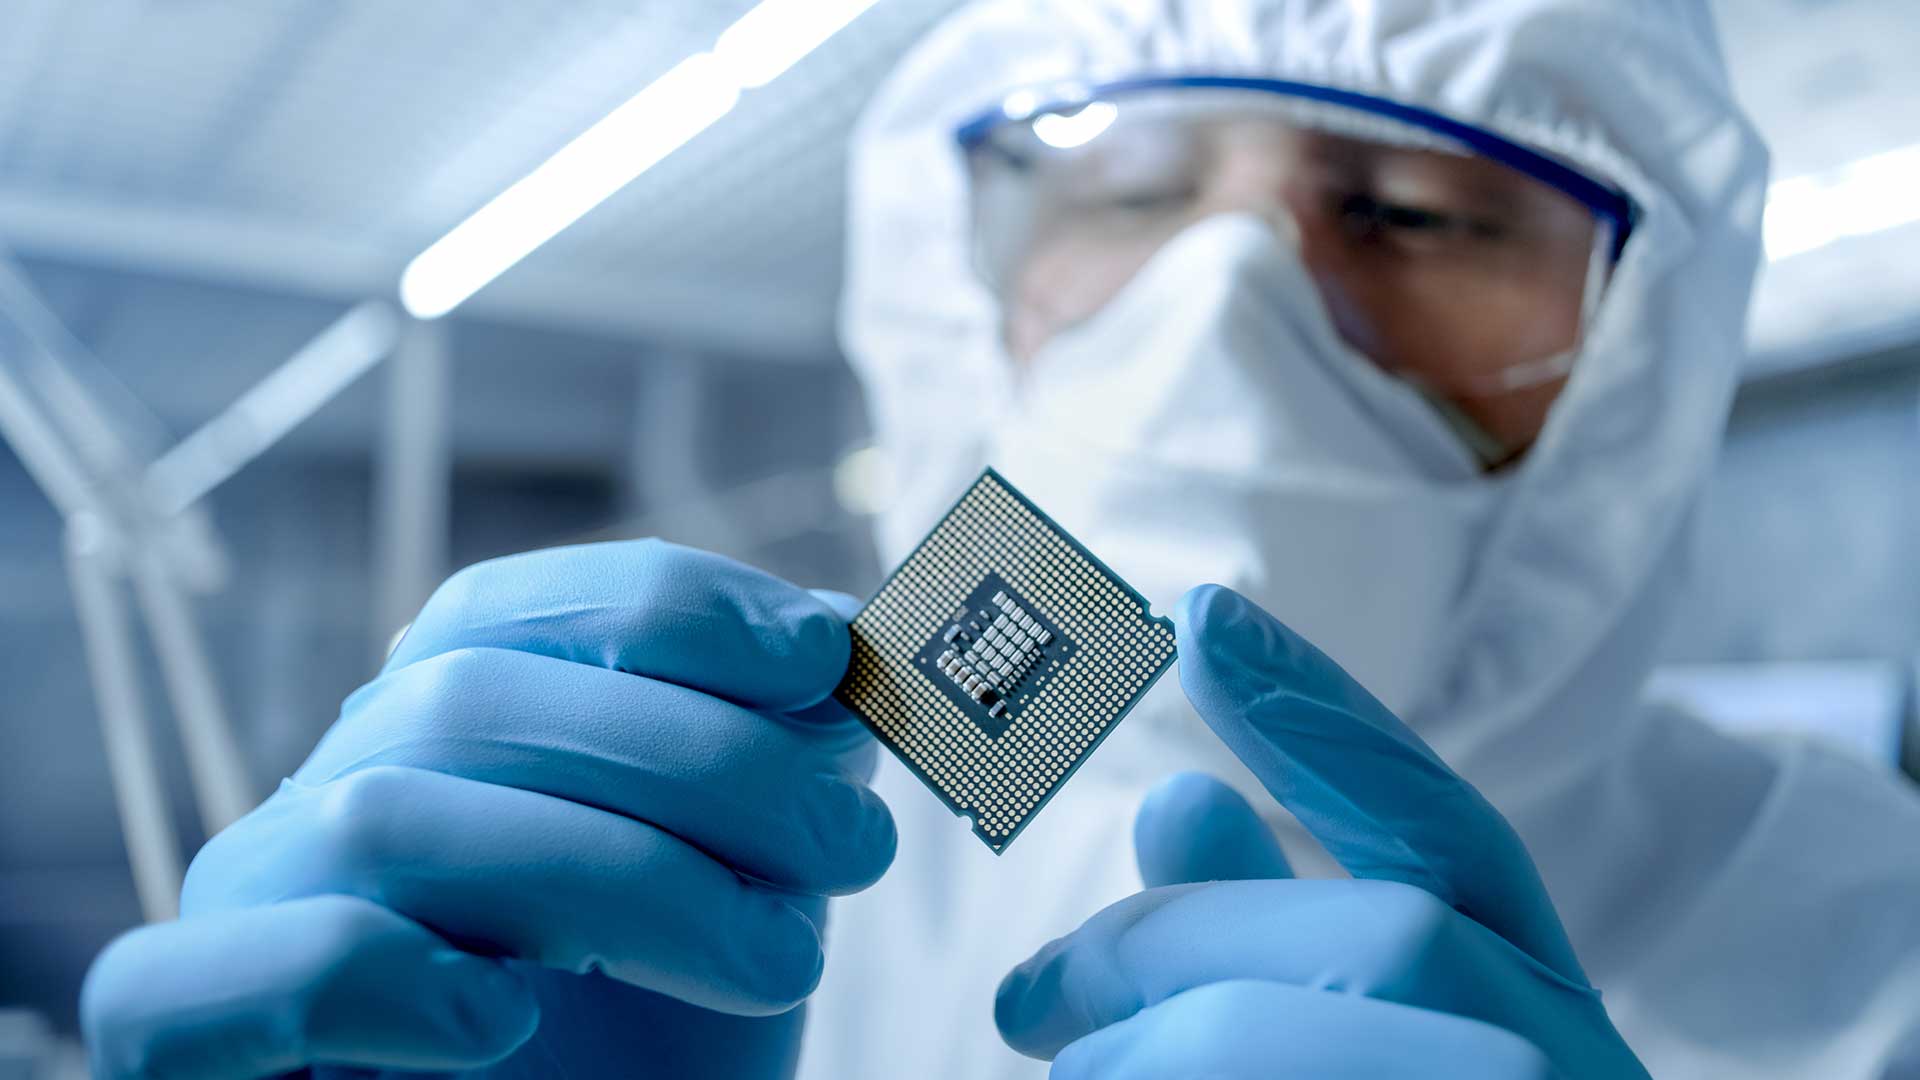 There's a global microchip shortage, and it doesn't look like abating anytime soon. Image: 